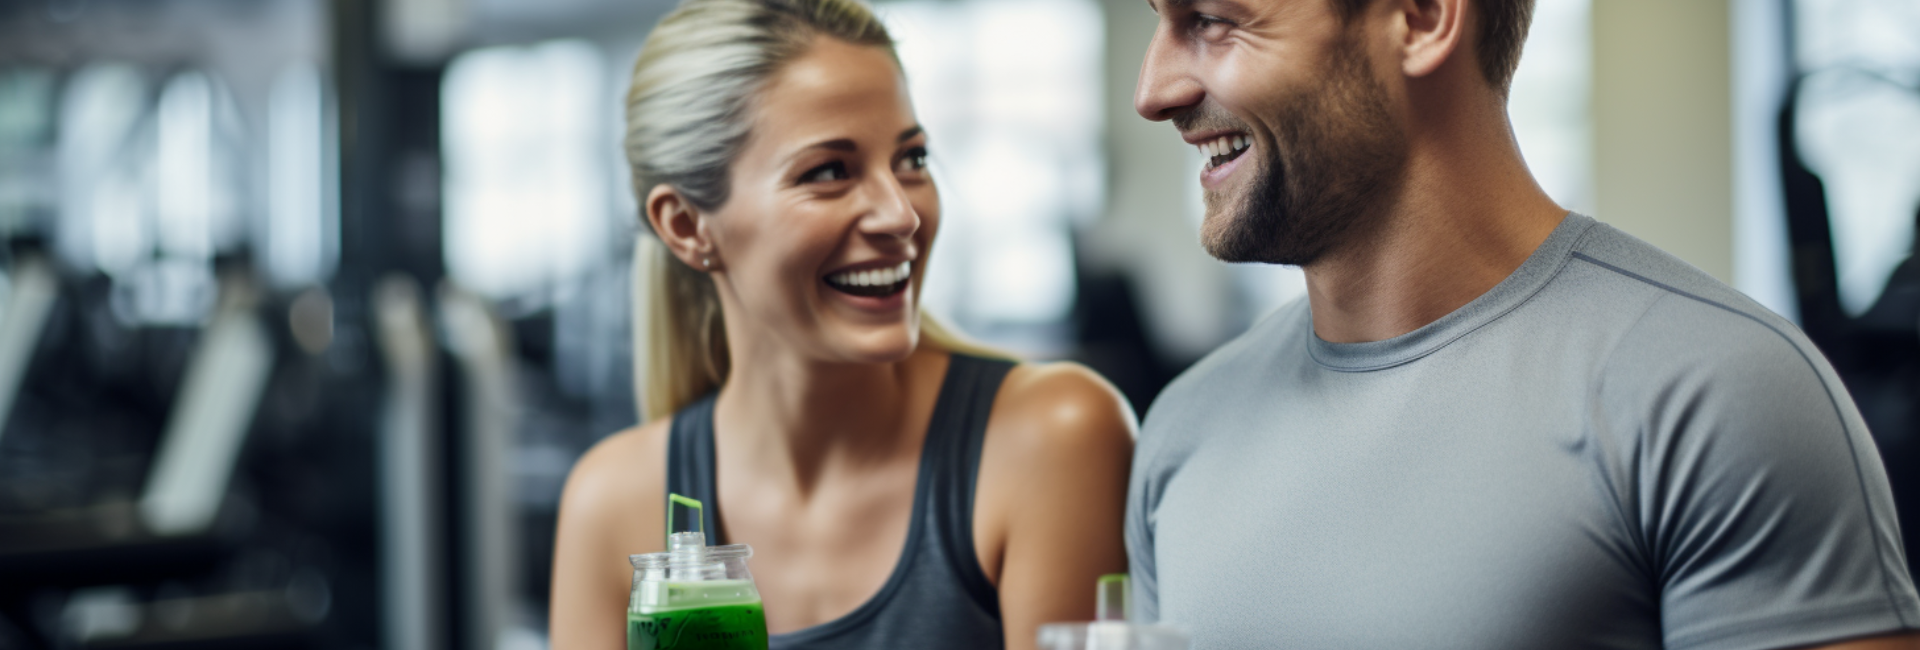 A couple getting ready for their workout session in the gym, energizing themselves with a refreshing greens drink.